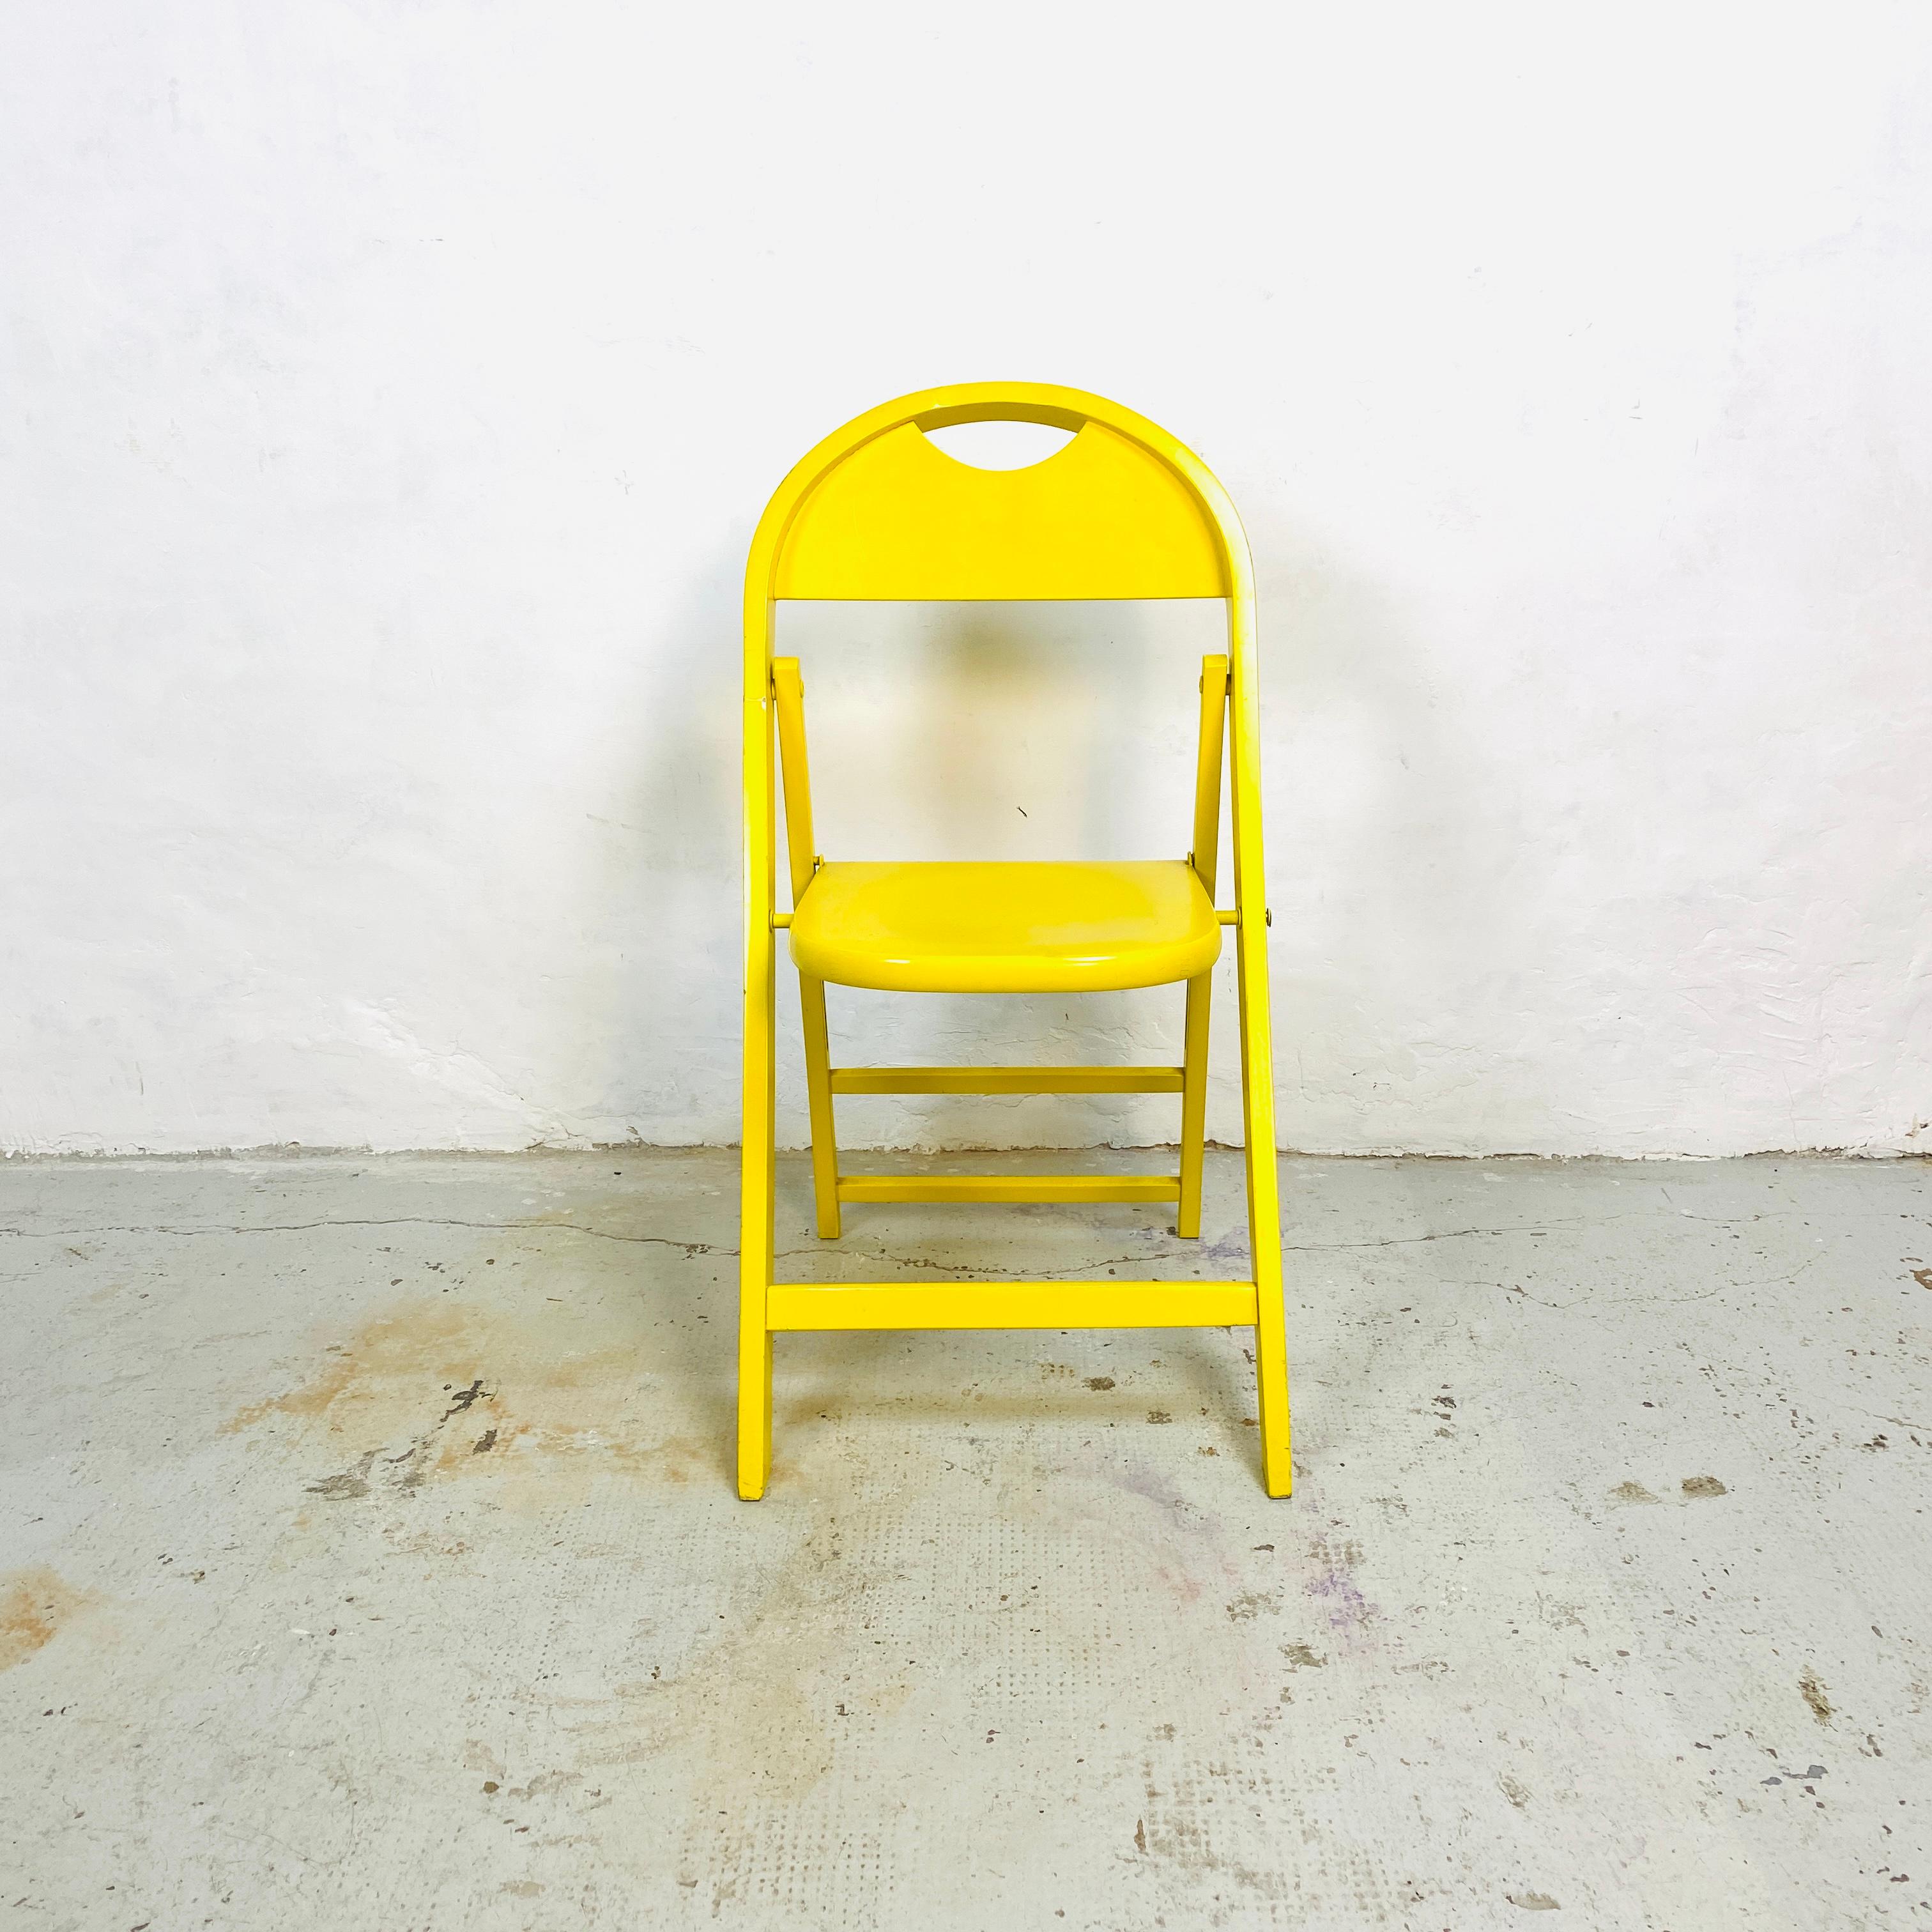 Italian Mid-Century Modern Tric yellow folding chair by A. Castiglioni, 1970s
Folding chair Tric with structure in curved beech wood and seat made of molded plywood painted in yellow. Produced in the 1970s, drawing by Achille and Pier Giacomo